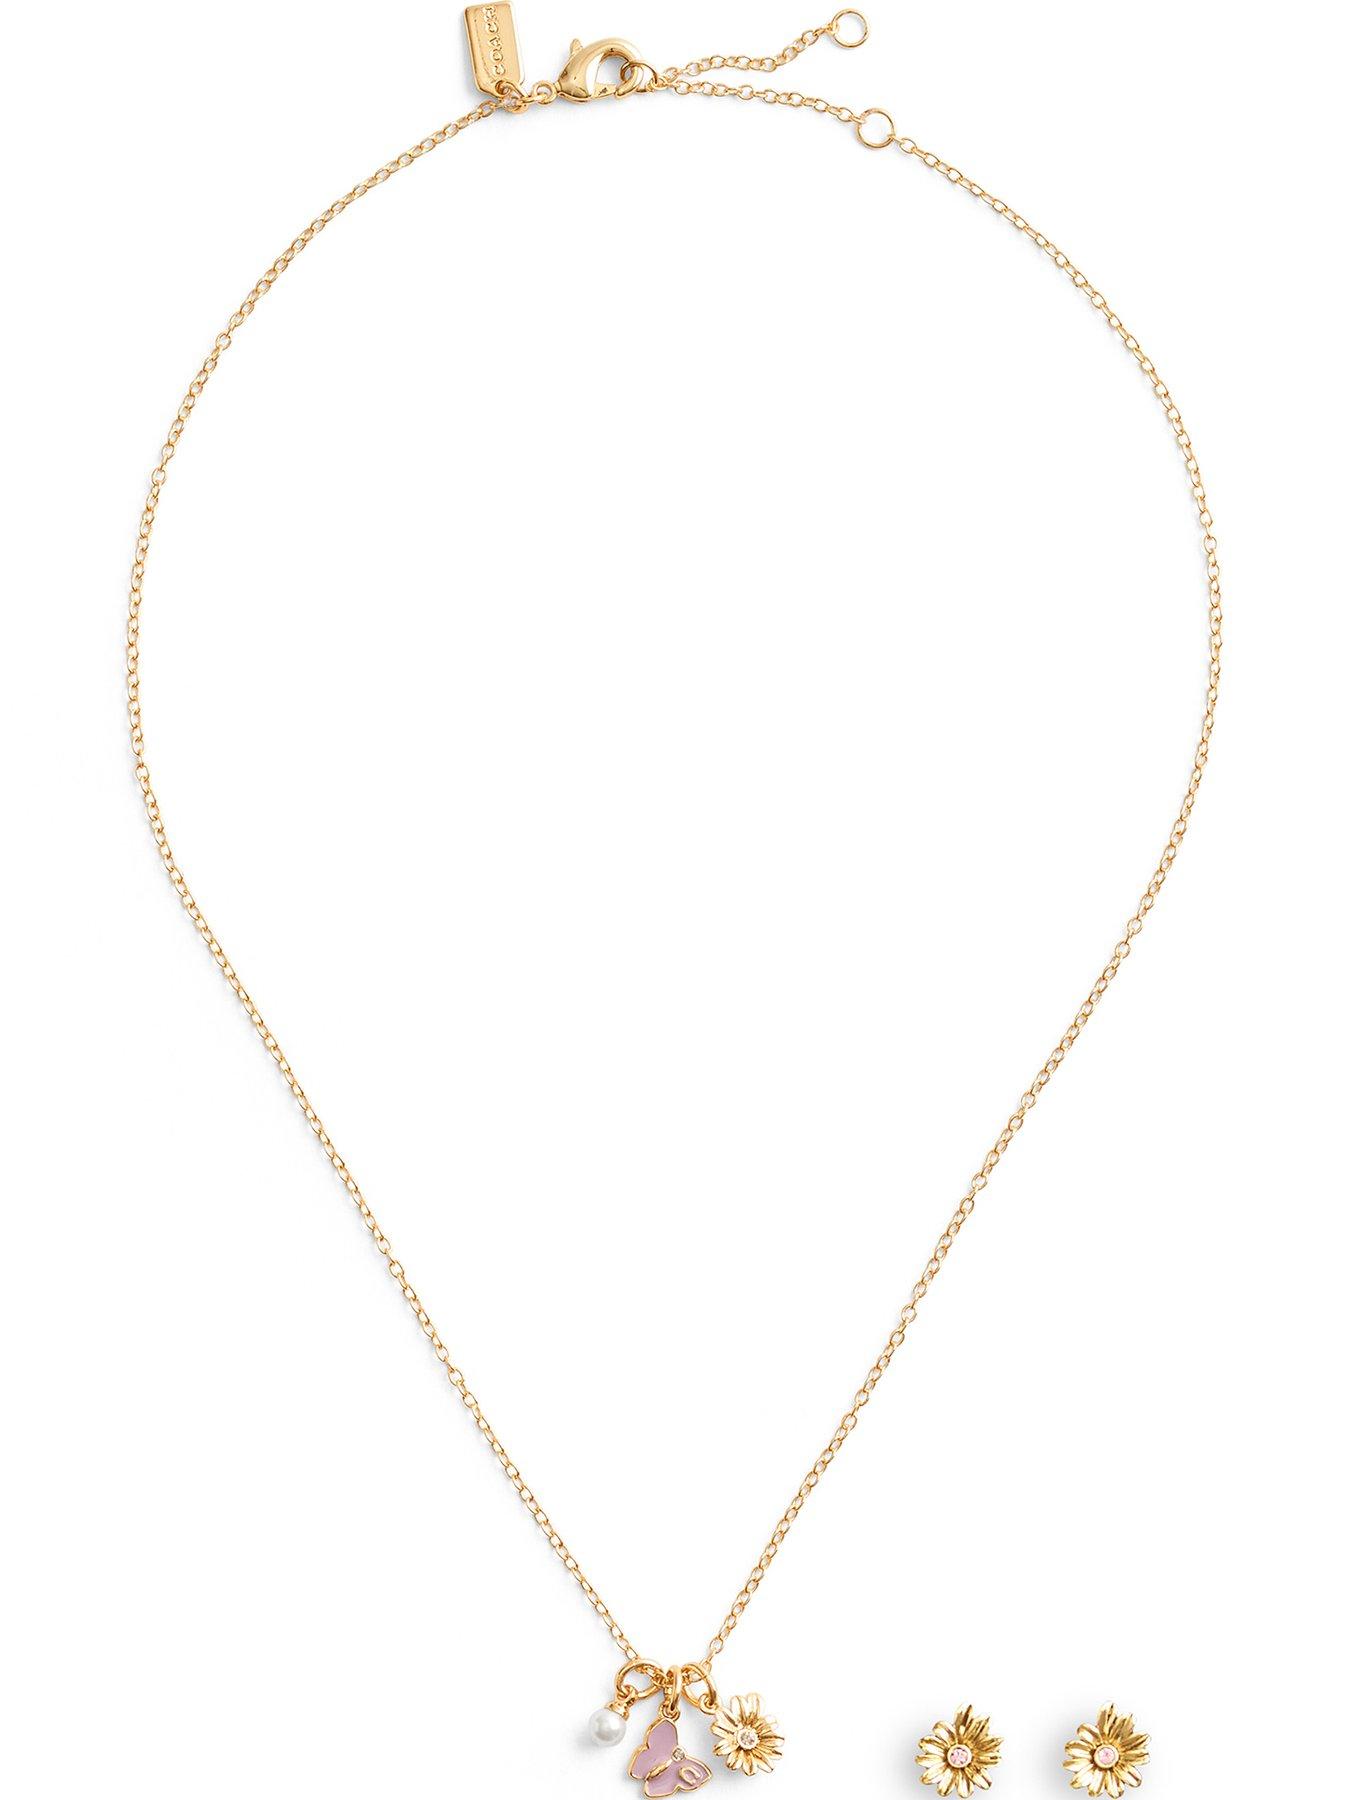 Necklaces For Square Necklines  Gold necklace women, Boss lady, Pear body